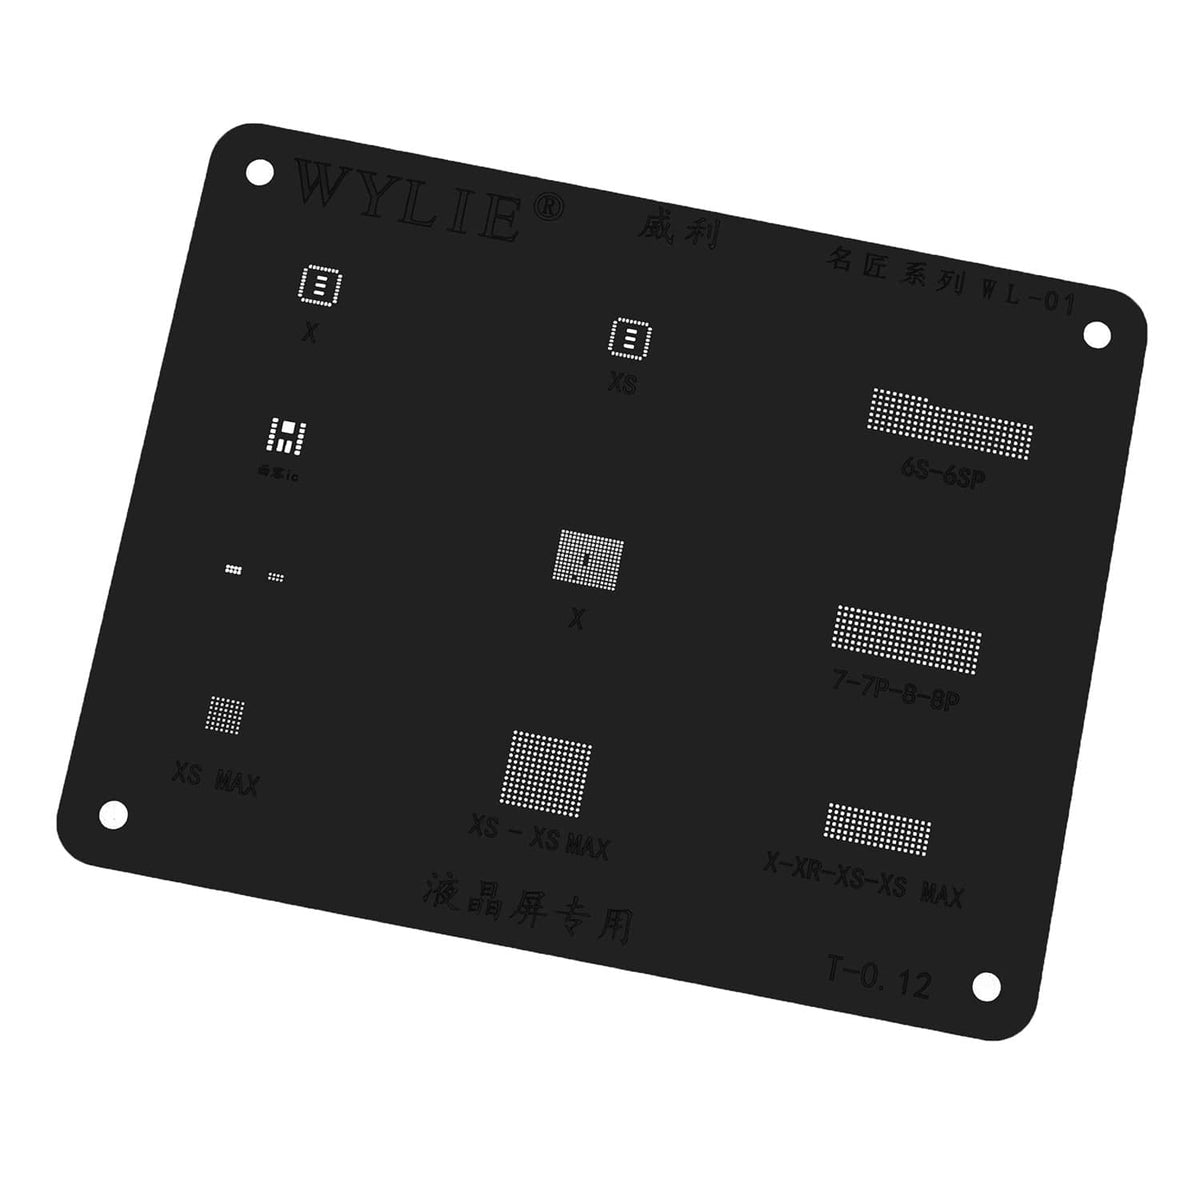 WYLIE BLACK BGA REBALLING STENCIL FOR IPHONE FOR LCD SCREEN